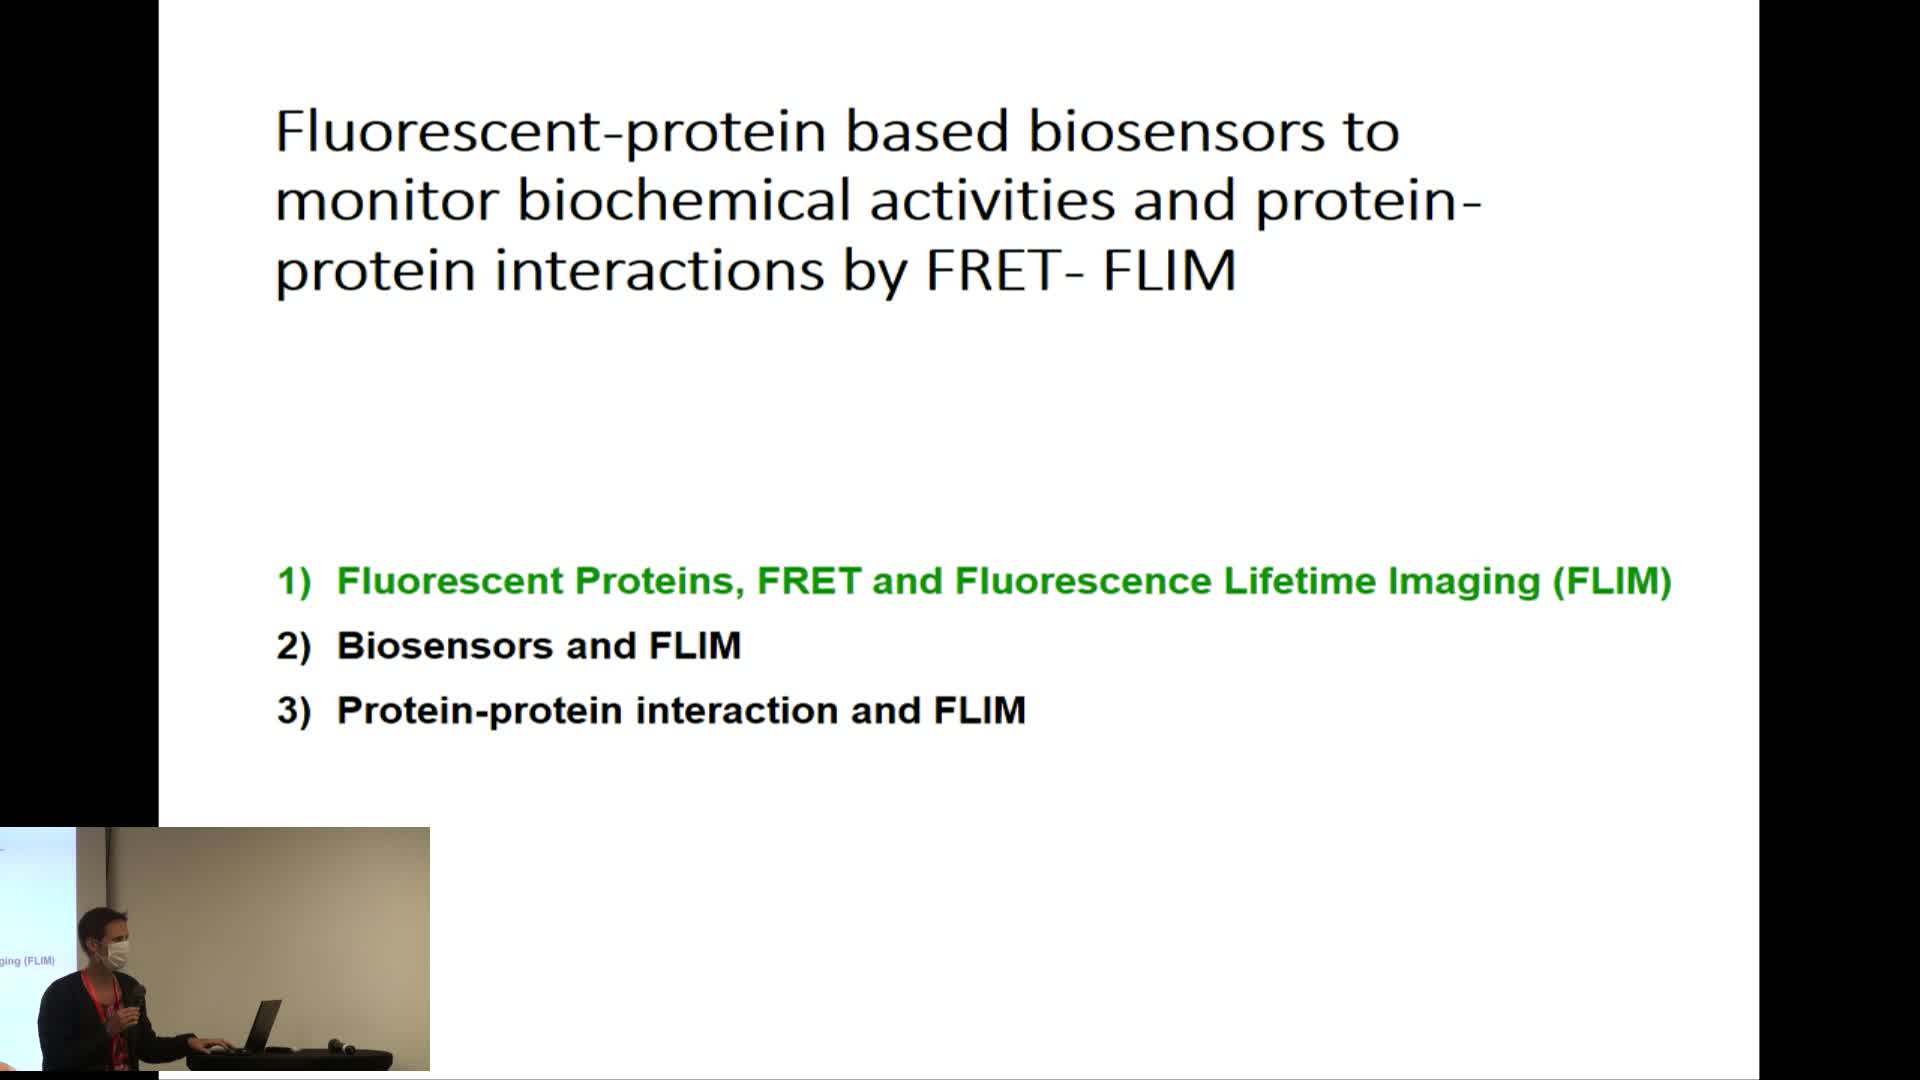 FRET by FLIM to monitor biochemical activities and protein-protein interactions - Marie Erard